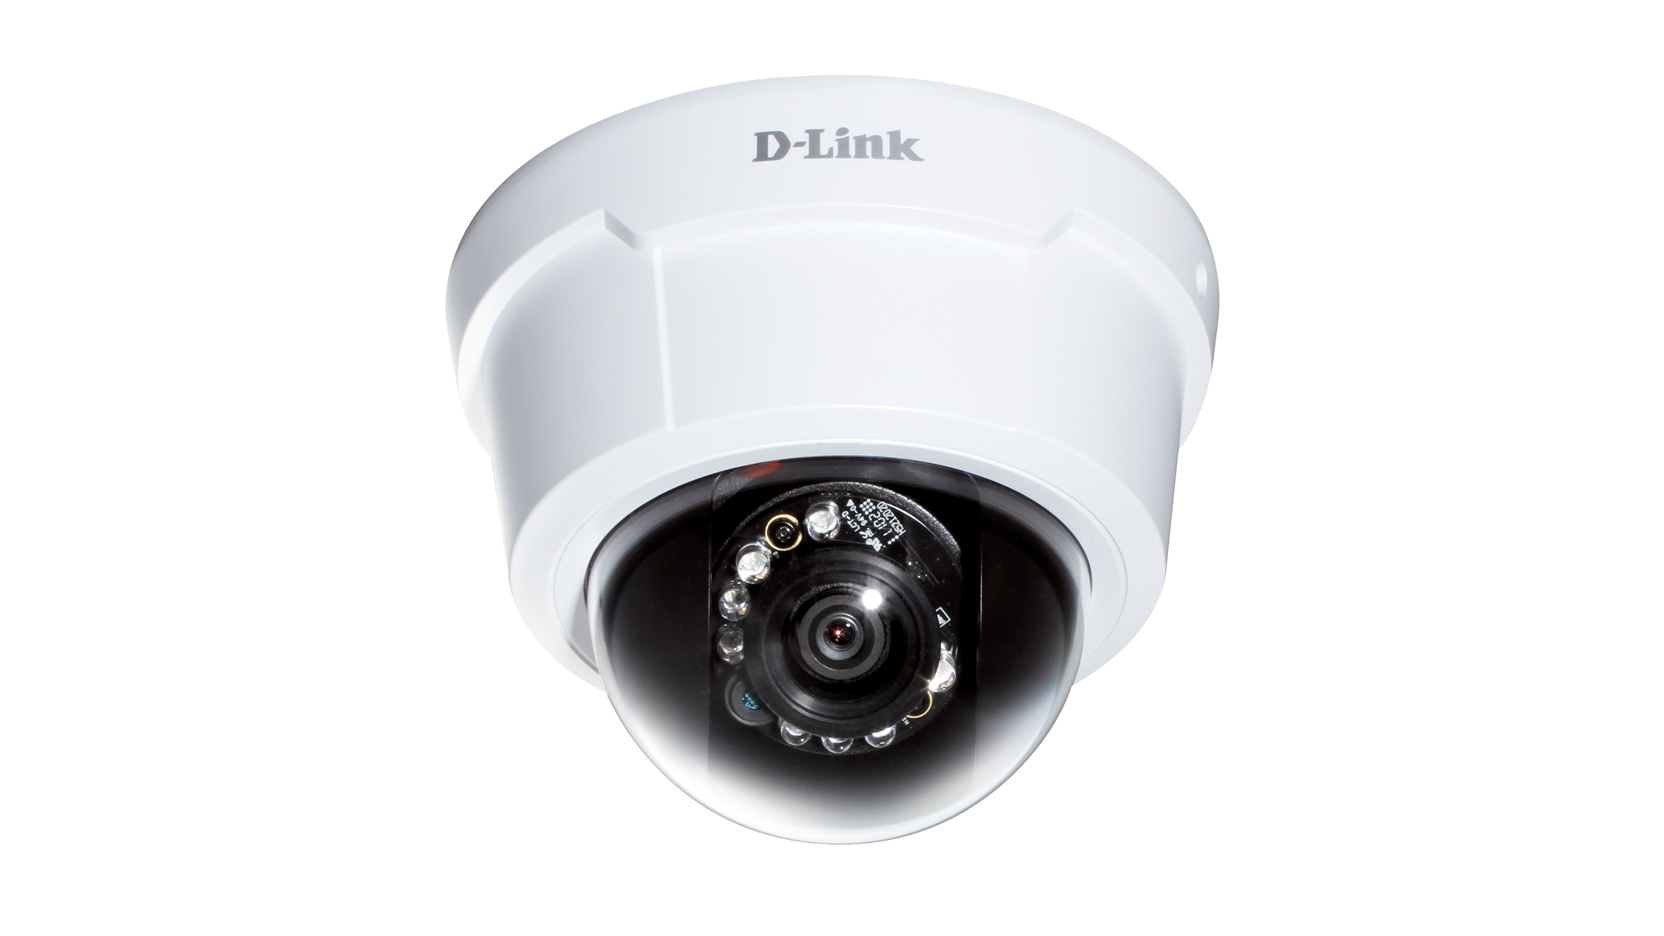 D-Link DCS-6113 Full HD Fixed Dome IP Network Dome Camera